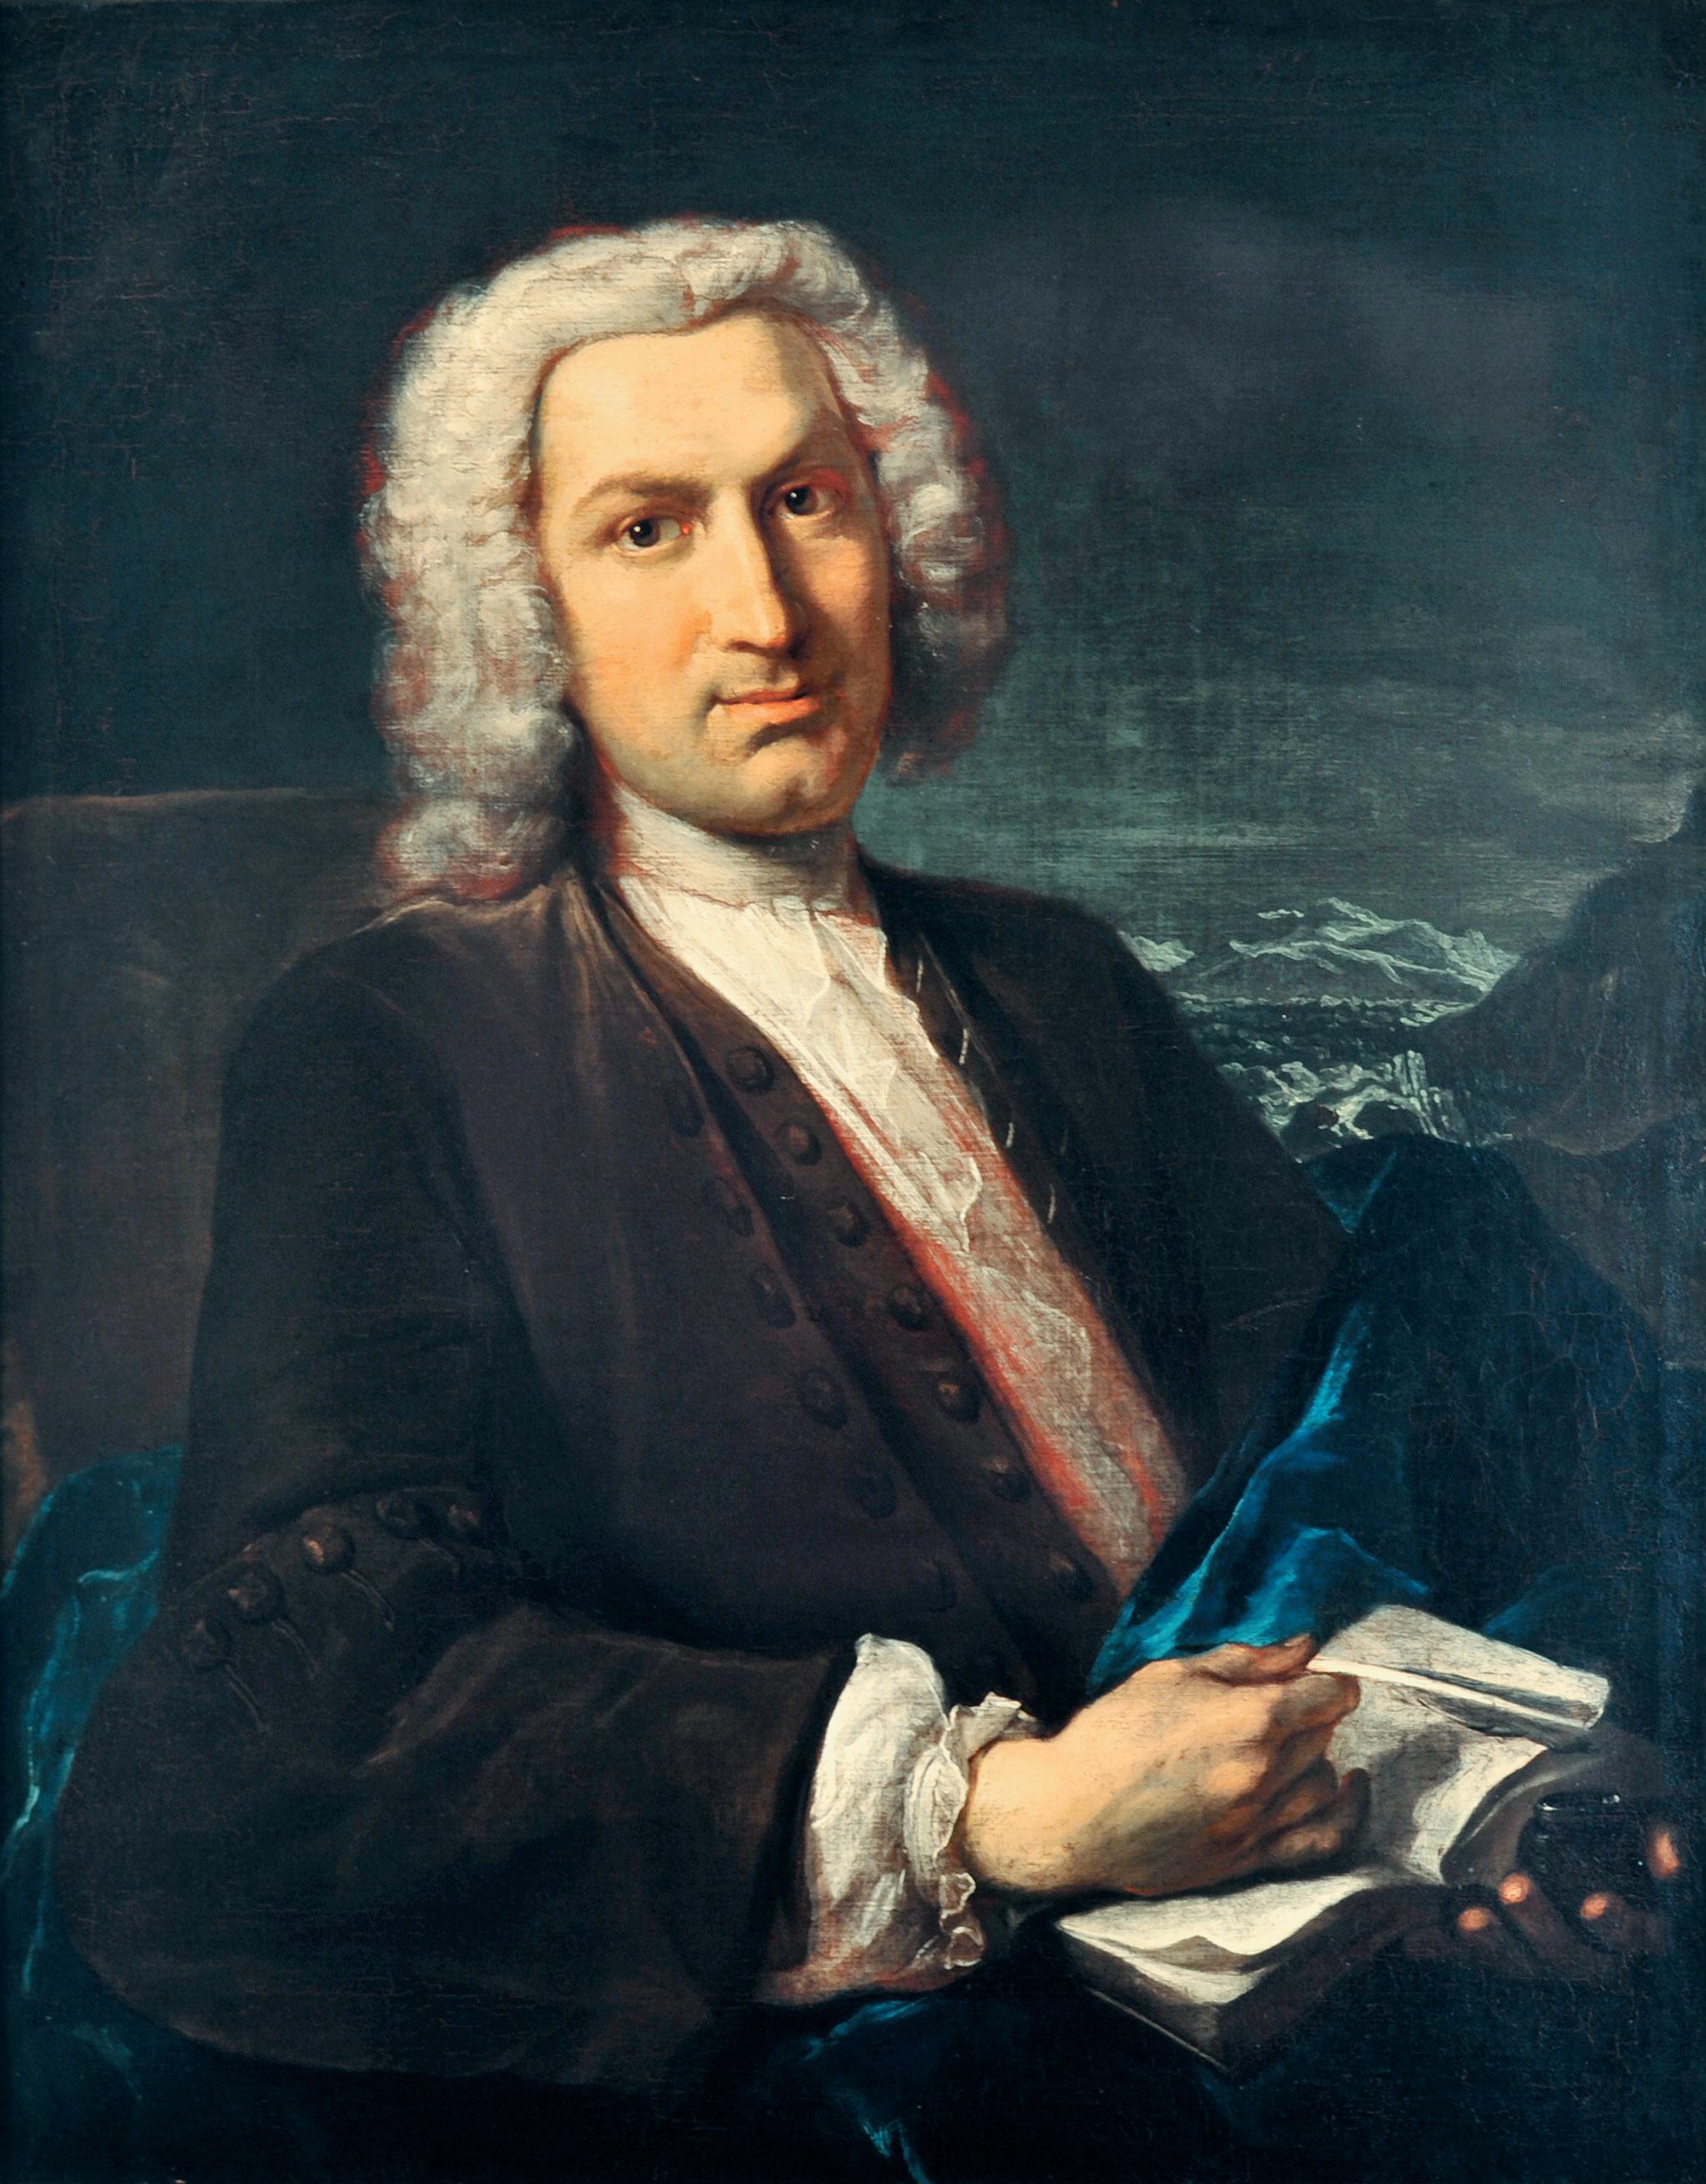 painting of Albrecht von Haller from 1736 with him wearing a wig and holding an open book in his lap; in the background, Swiss mountains are shown